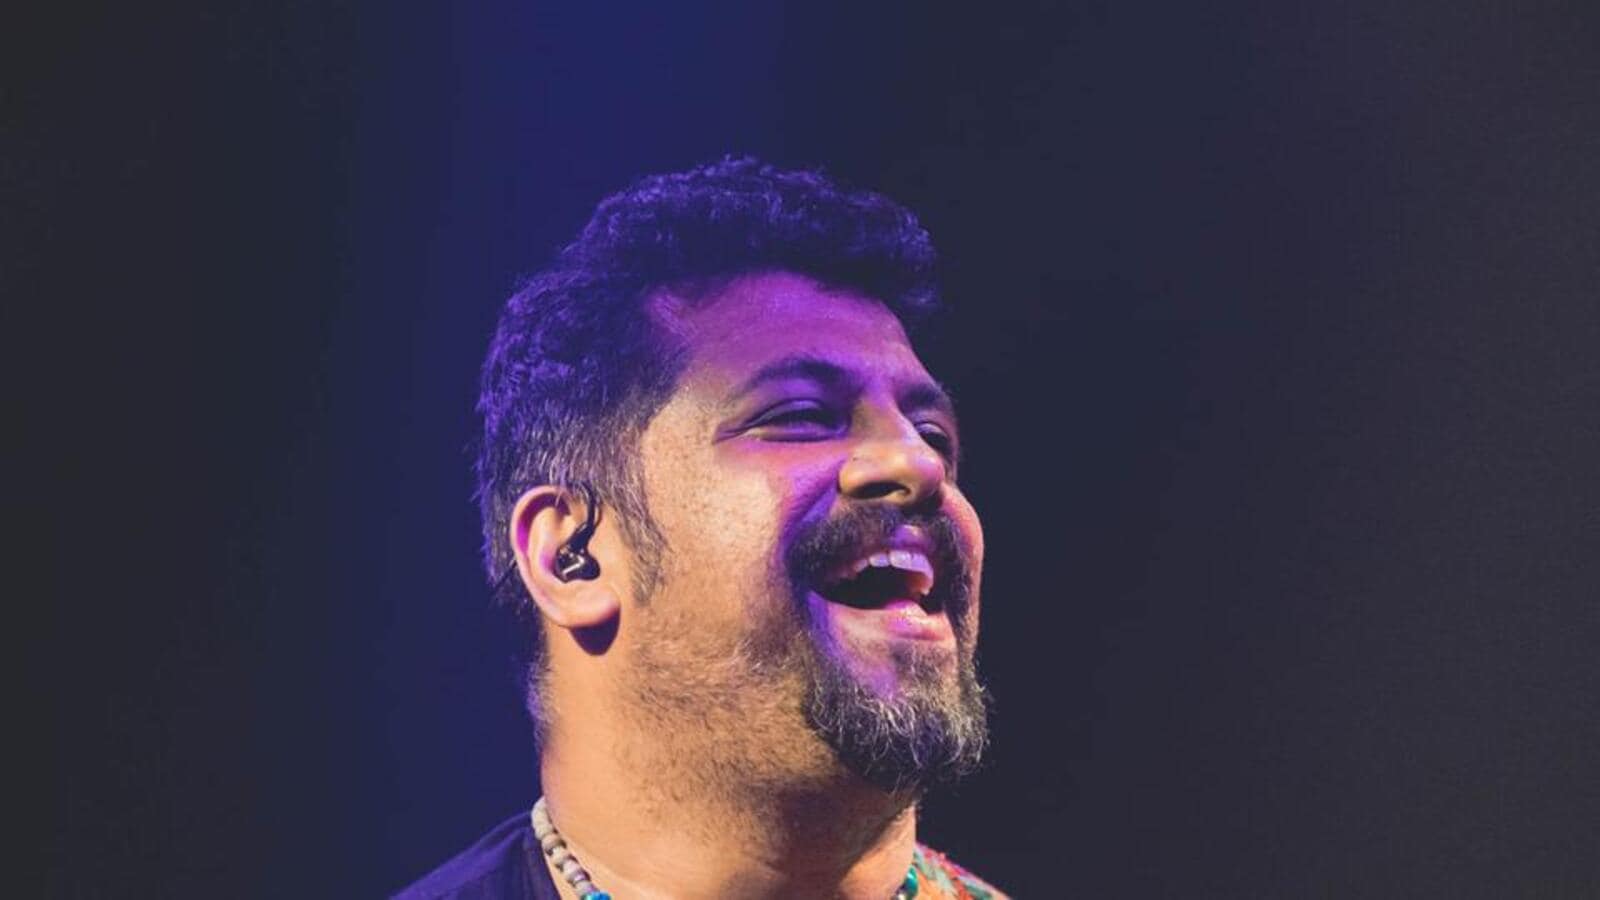 #IndiaAtCannes: Raghu Dixit to perform at Cannes film festival; hopes he can make people hum in Kannada